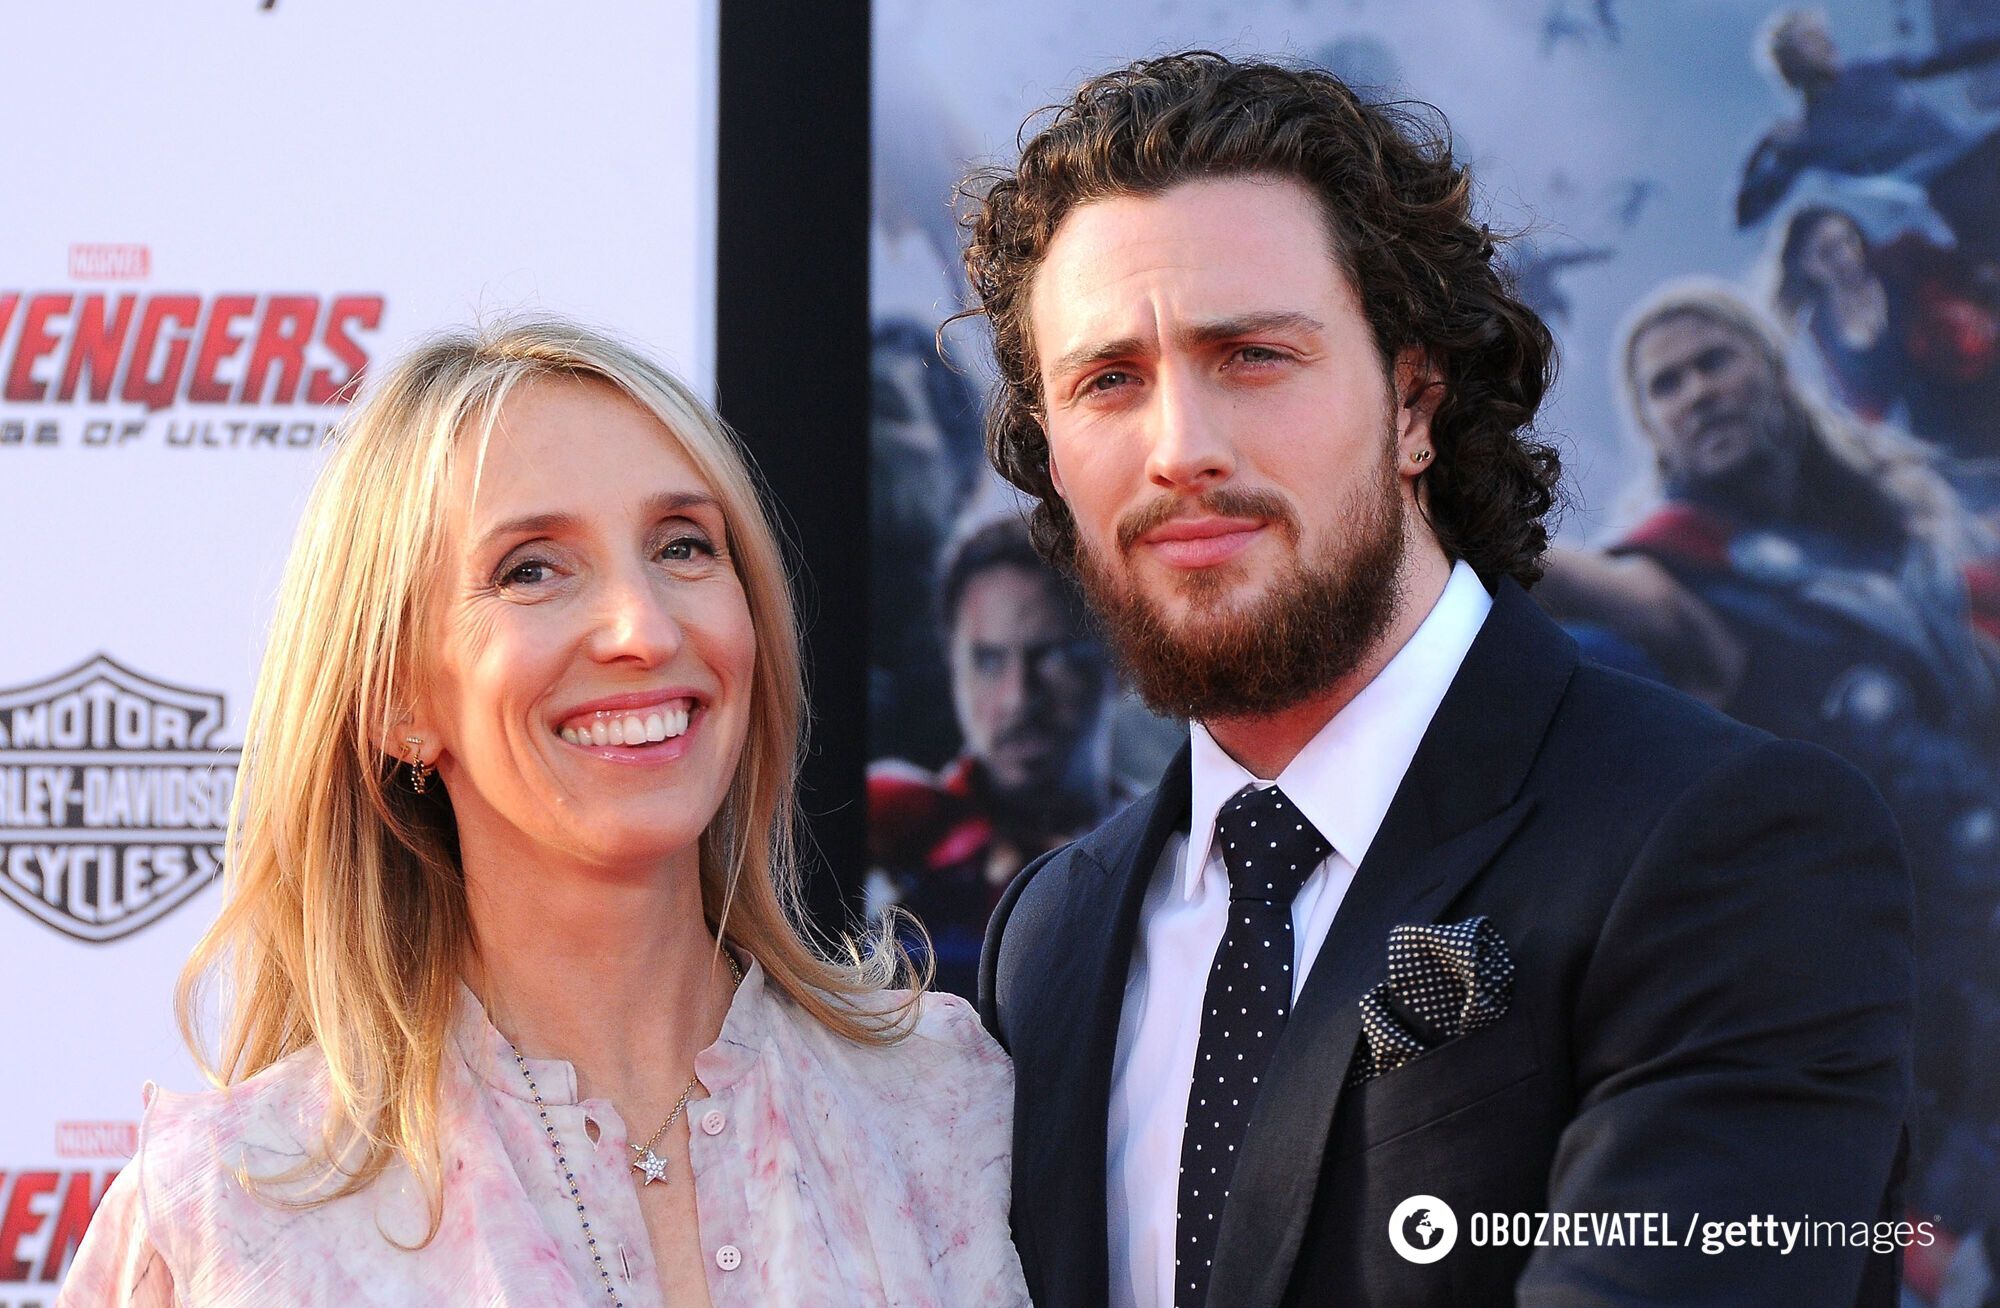 23 years older: what Aaron Taylor-Johnson's wife looks like and why people can not put up with their marriage